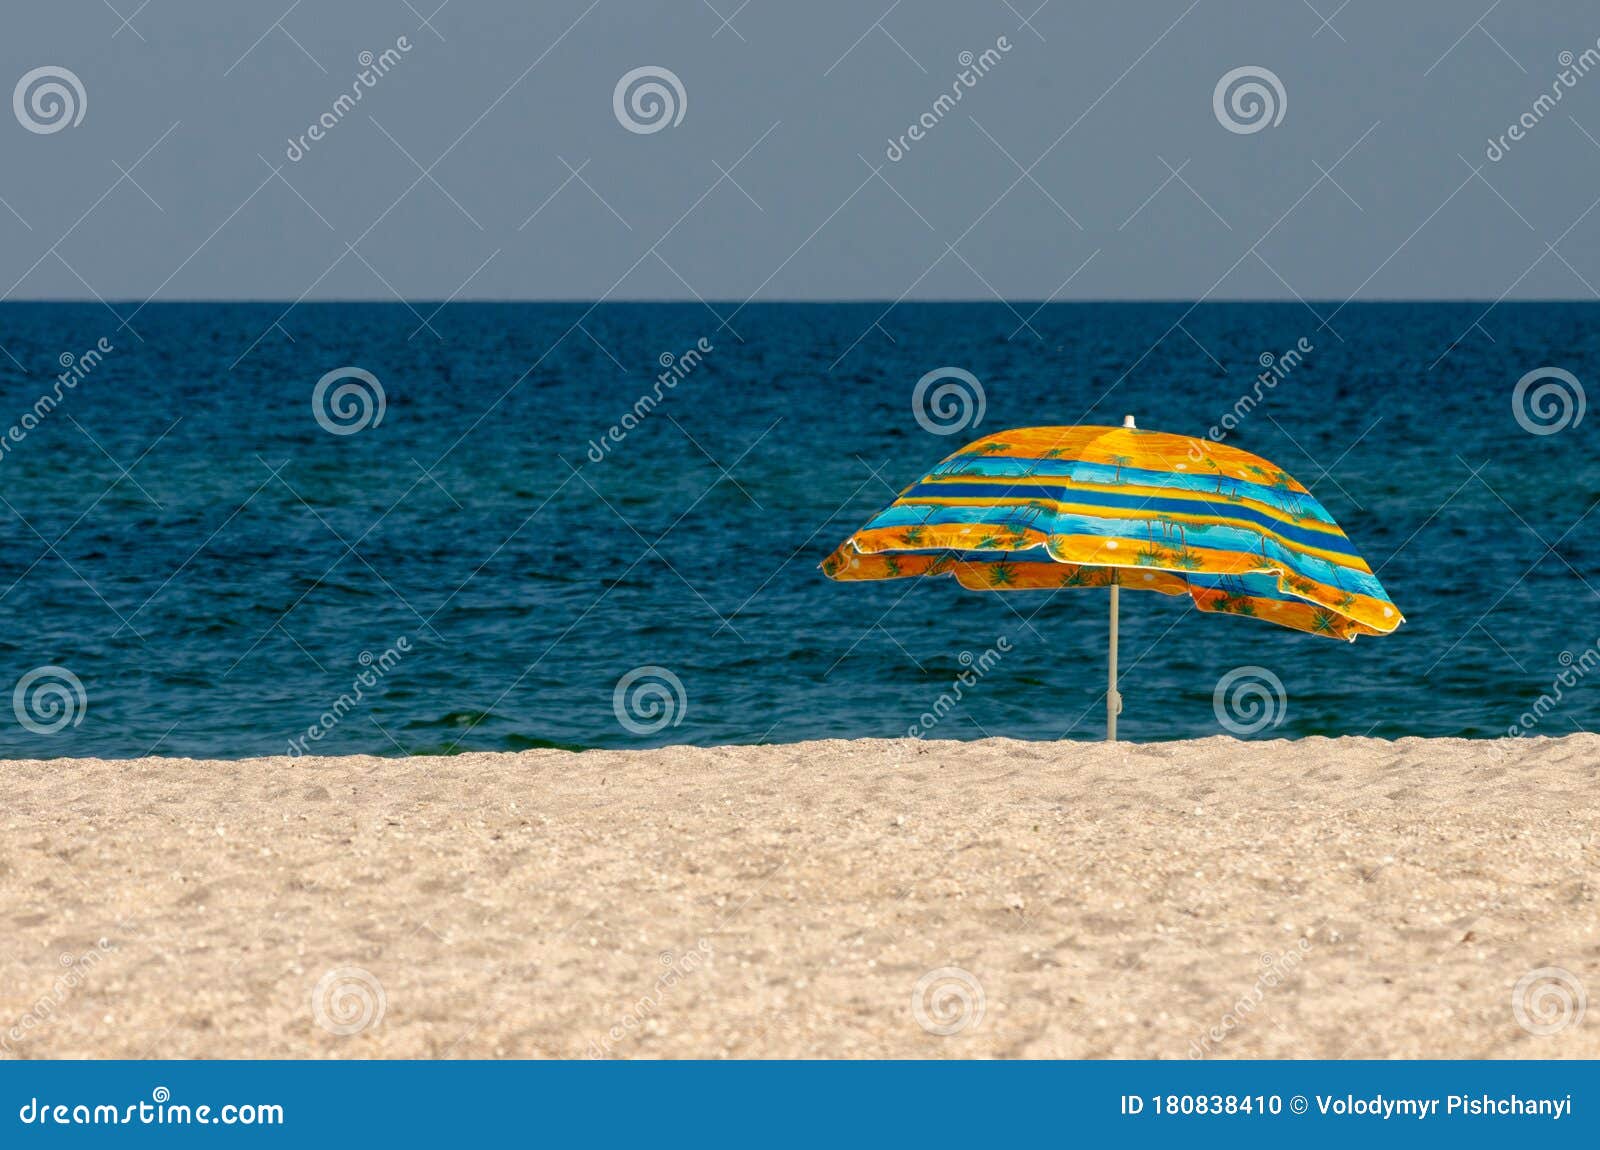 Lonely Beach Umbrella on a Deserted Sea Beach Stock Photo - Image of ...